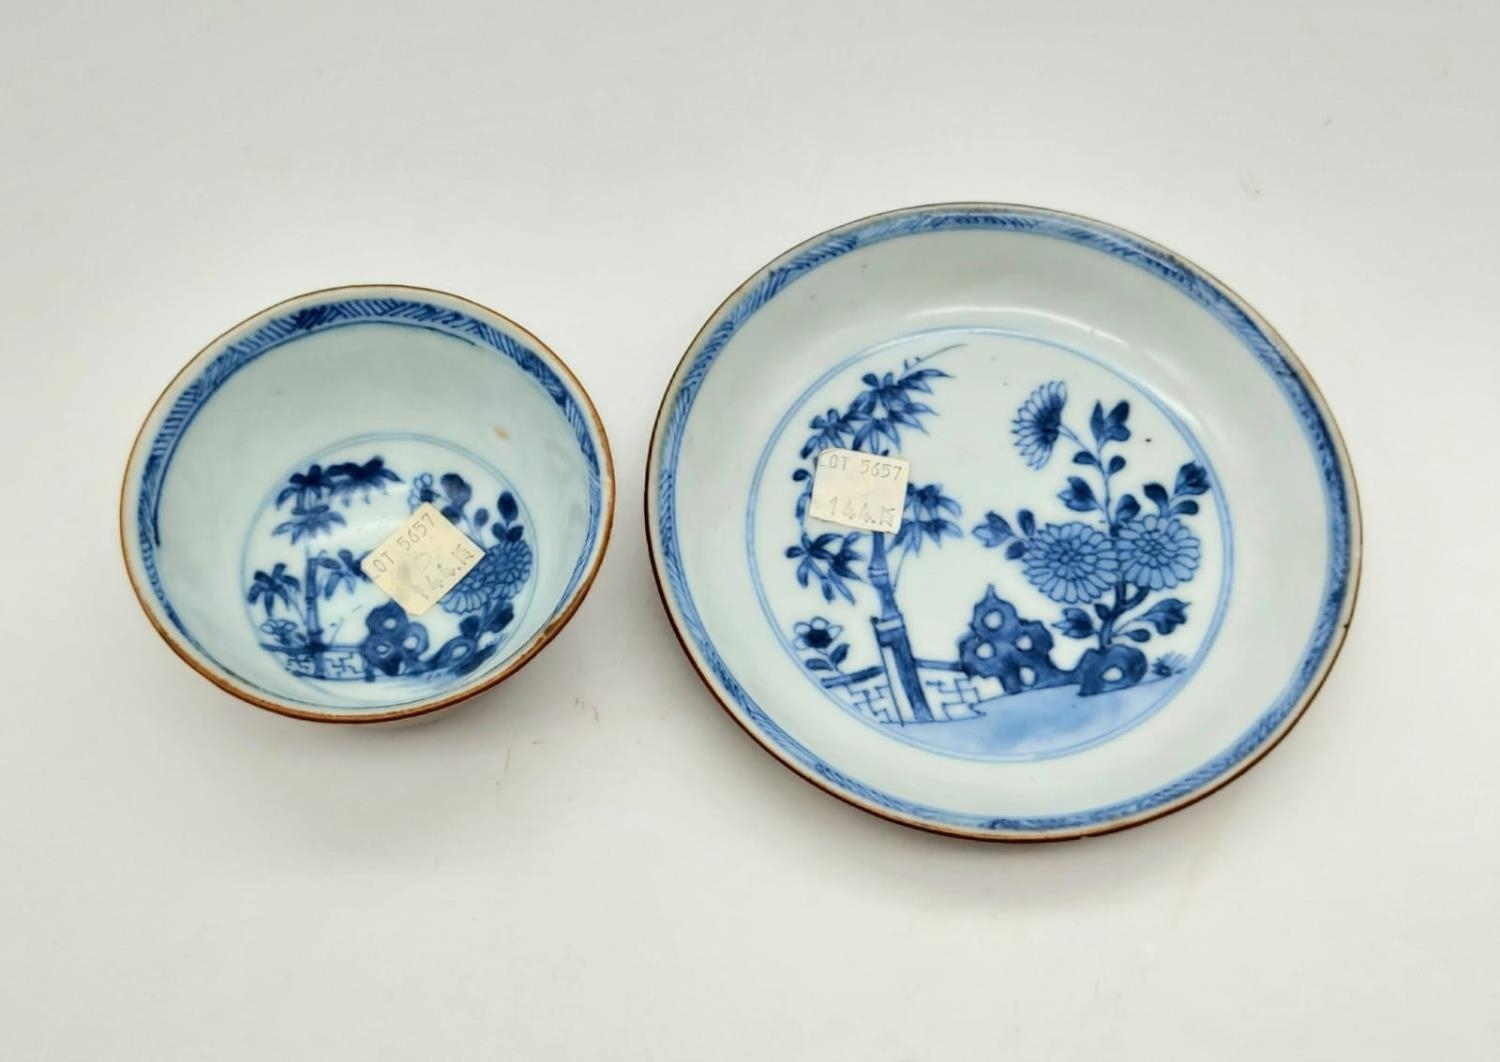 A Nanking Cargo Teacup and Saucer. Hand-Painted with the Batavian Bamboo and Chrysanthemum